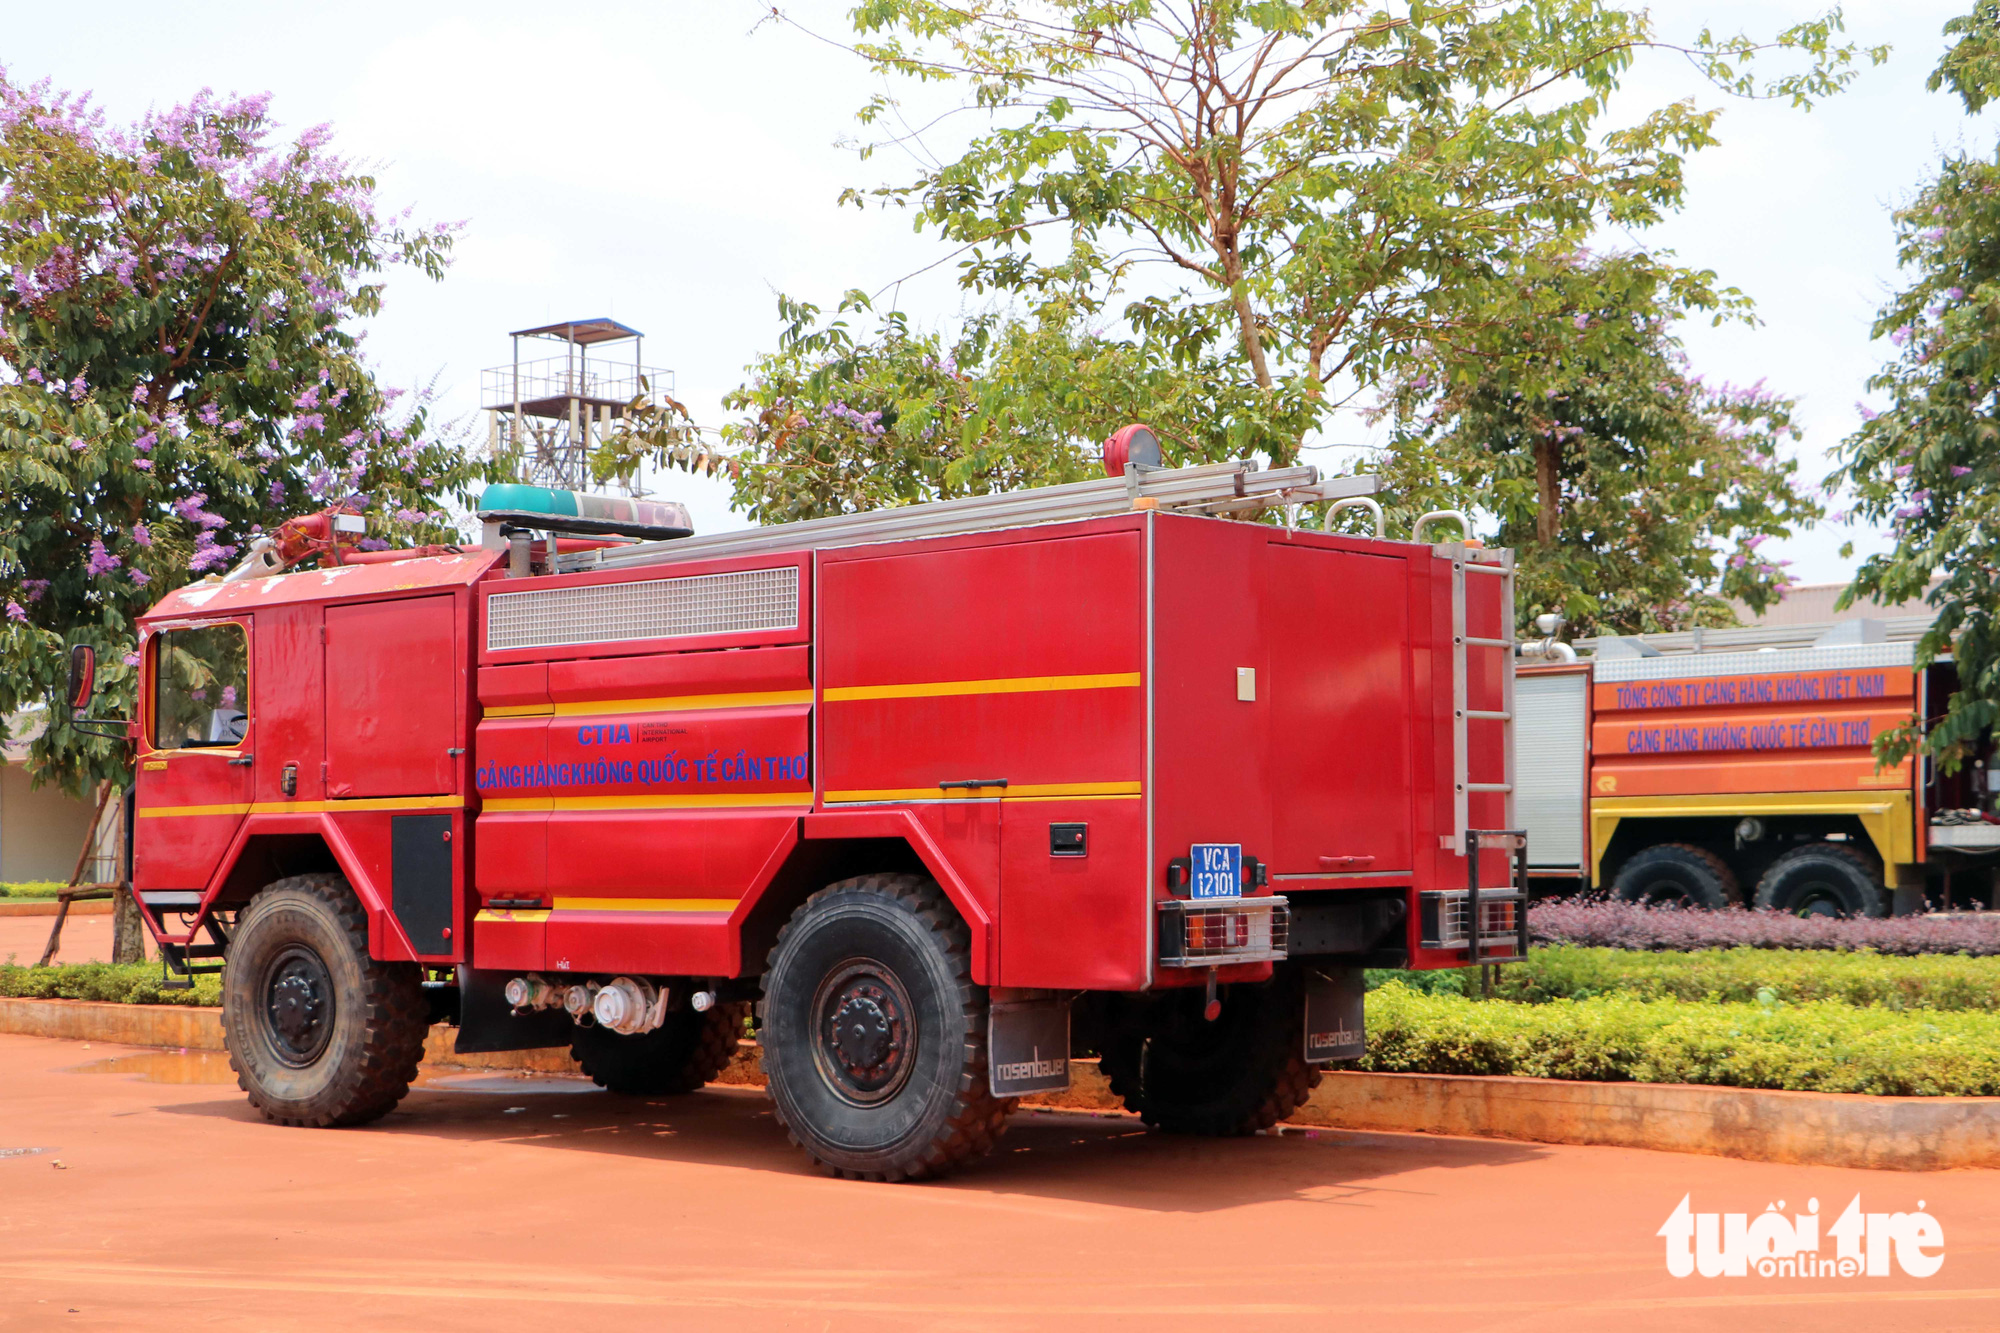 The investor of the project mobilizes fire trucks to spray water.